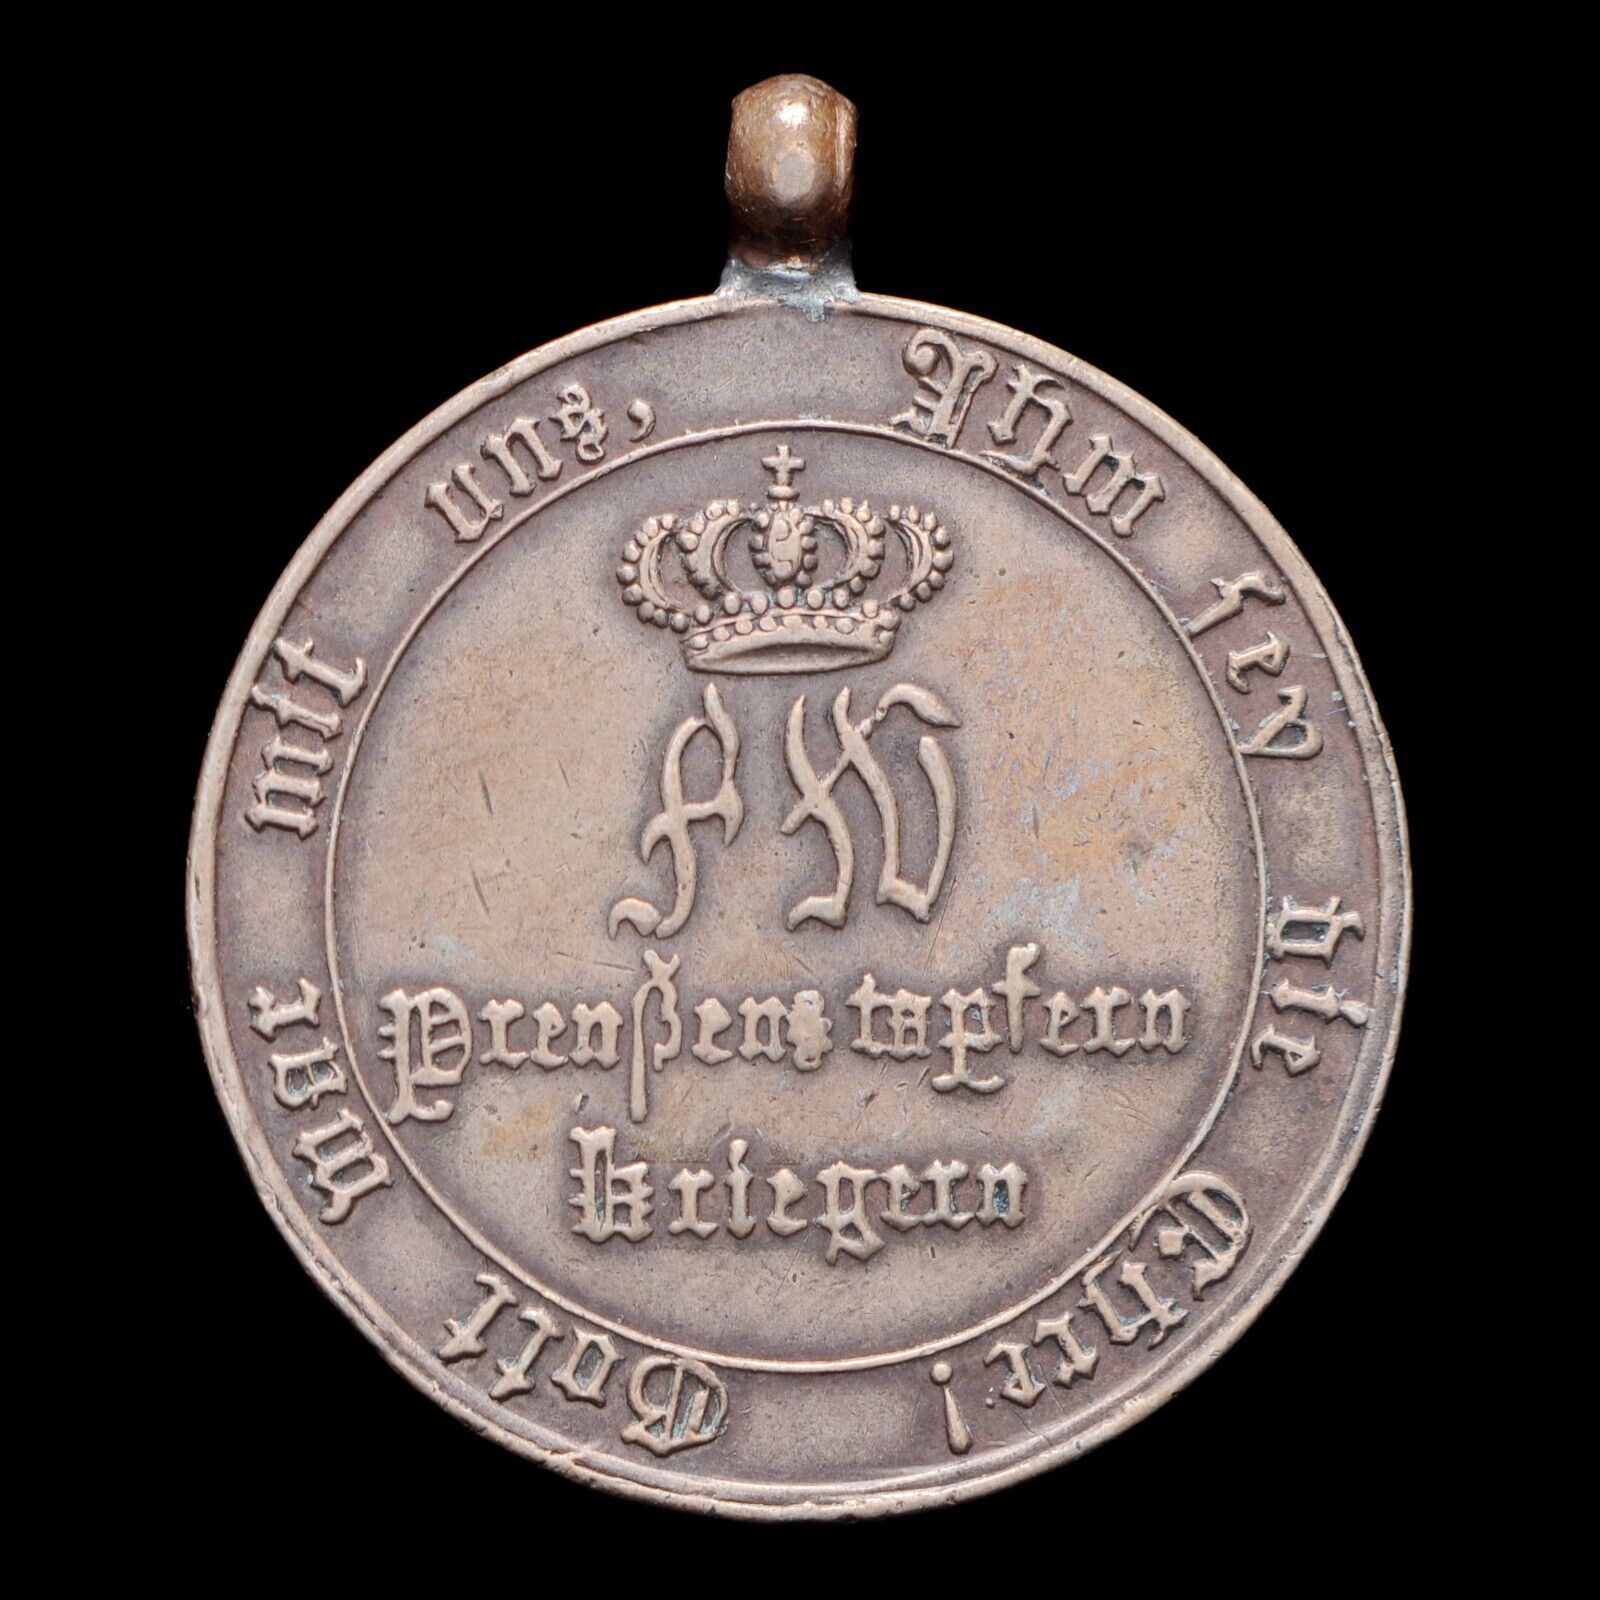 A Napoleonic 1813-1814 Campaign Medal Germany Prussia